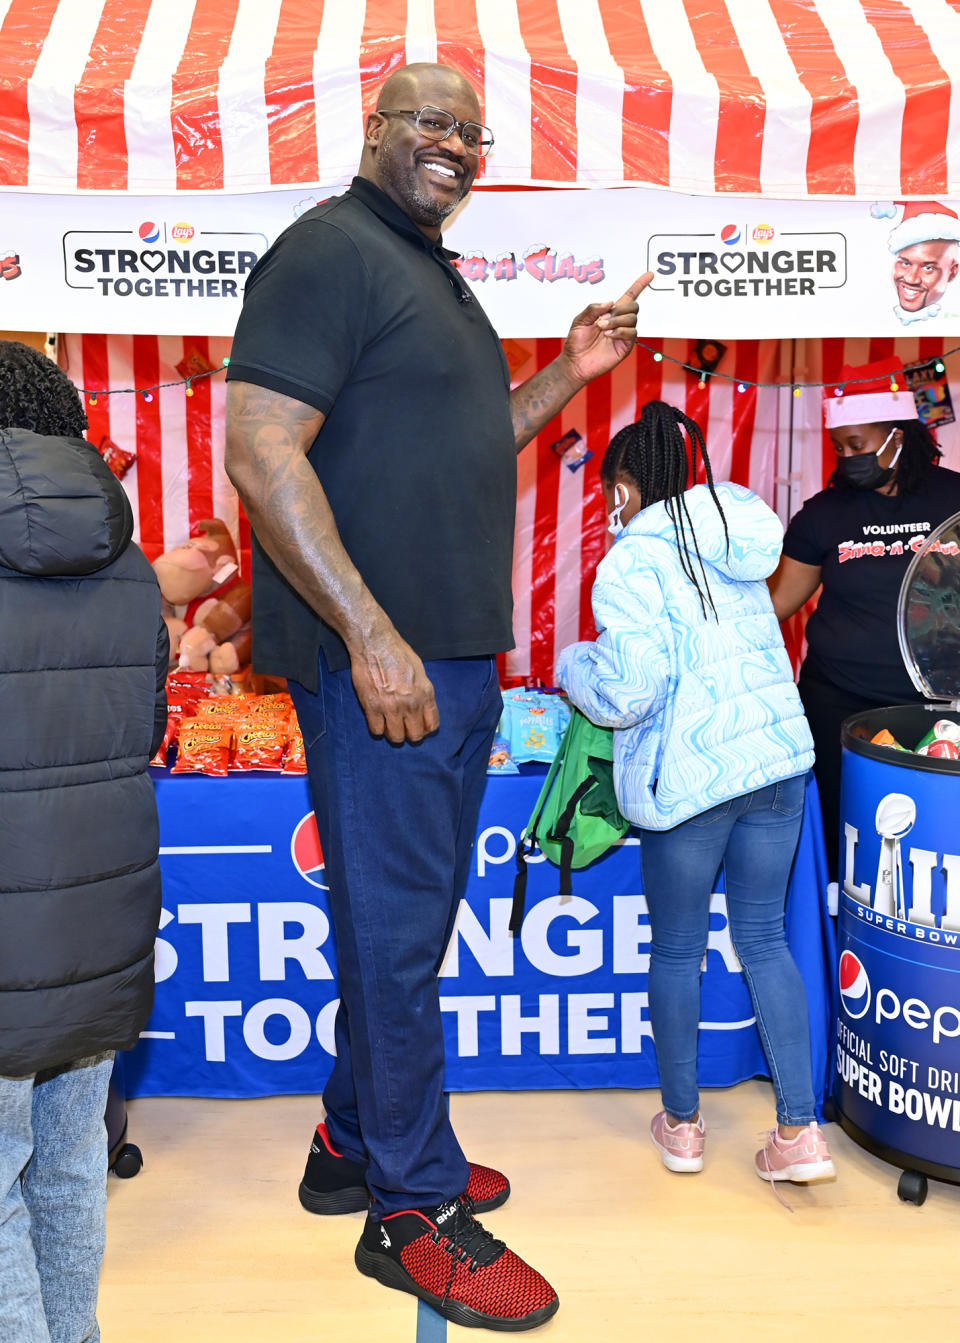 <p>Shaquille O'Neal surprises an Atlanta school with toys and treats as part of his Shaq-A-Claus and Pepsi Stronger Together event on Dec. 20 in McDonough, Georgia.</p>